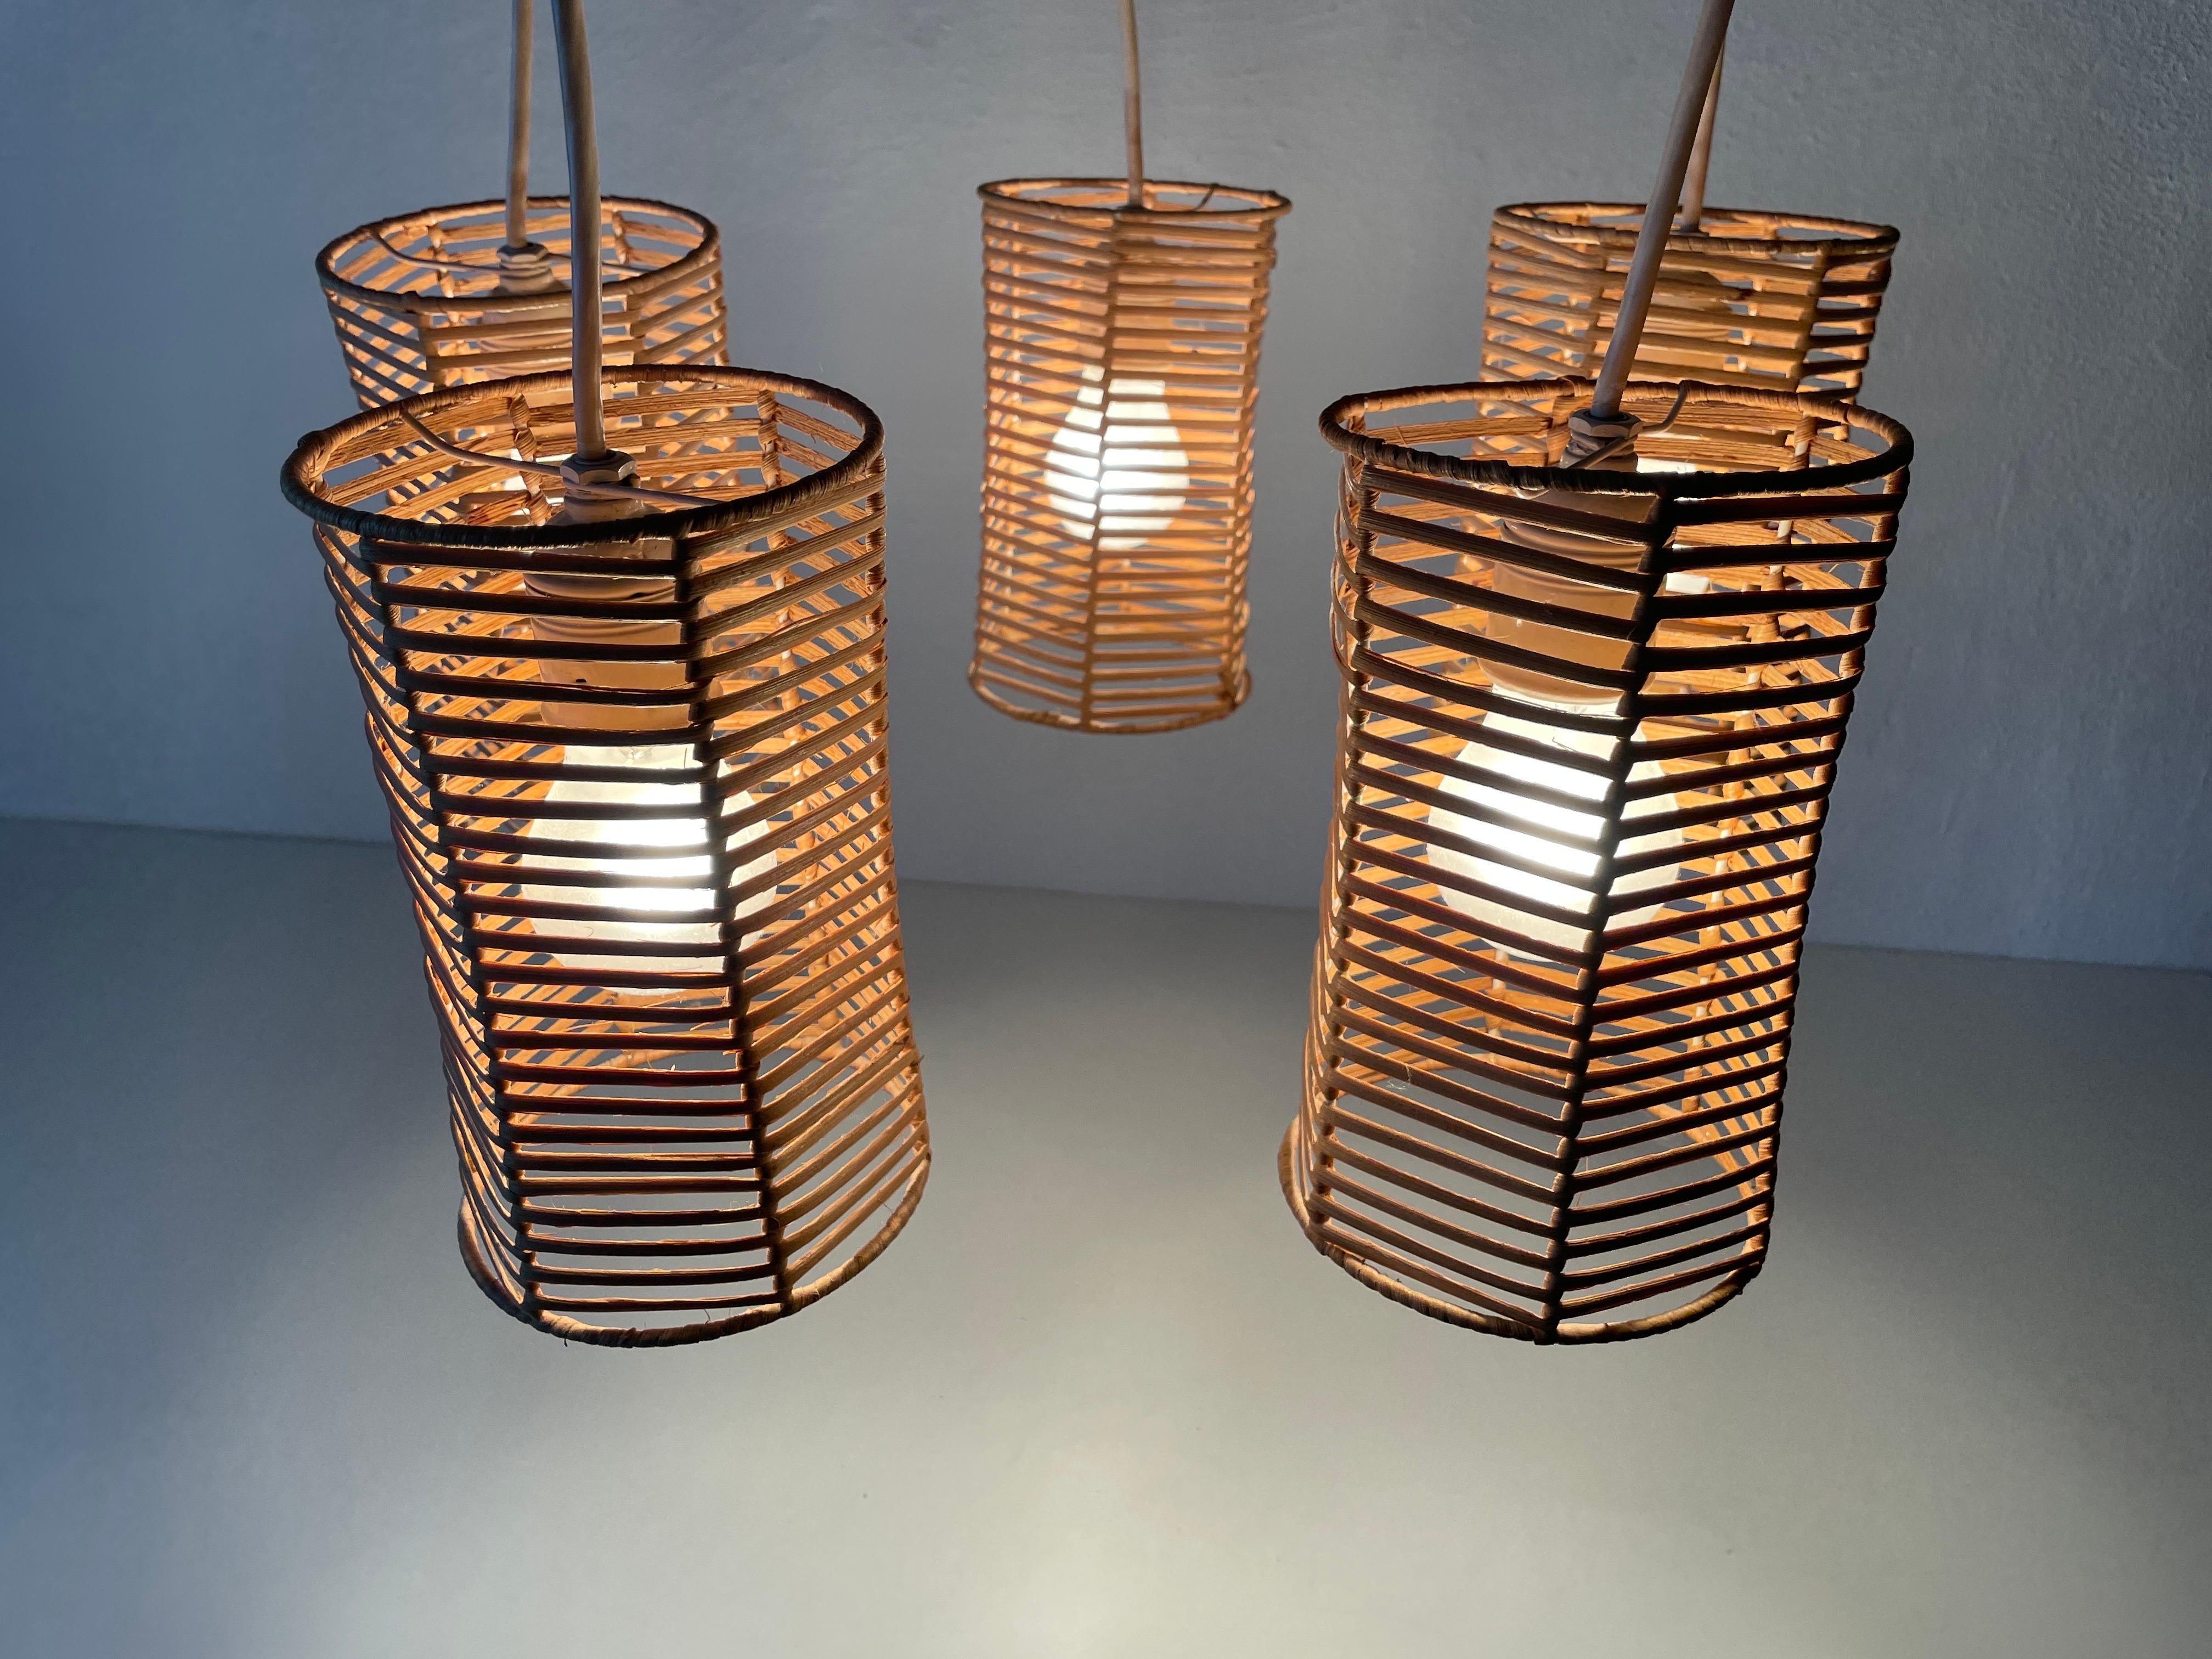 5-head Wicker and Wood Pendant Lamp, 1960s, Germany For Sale 10